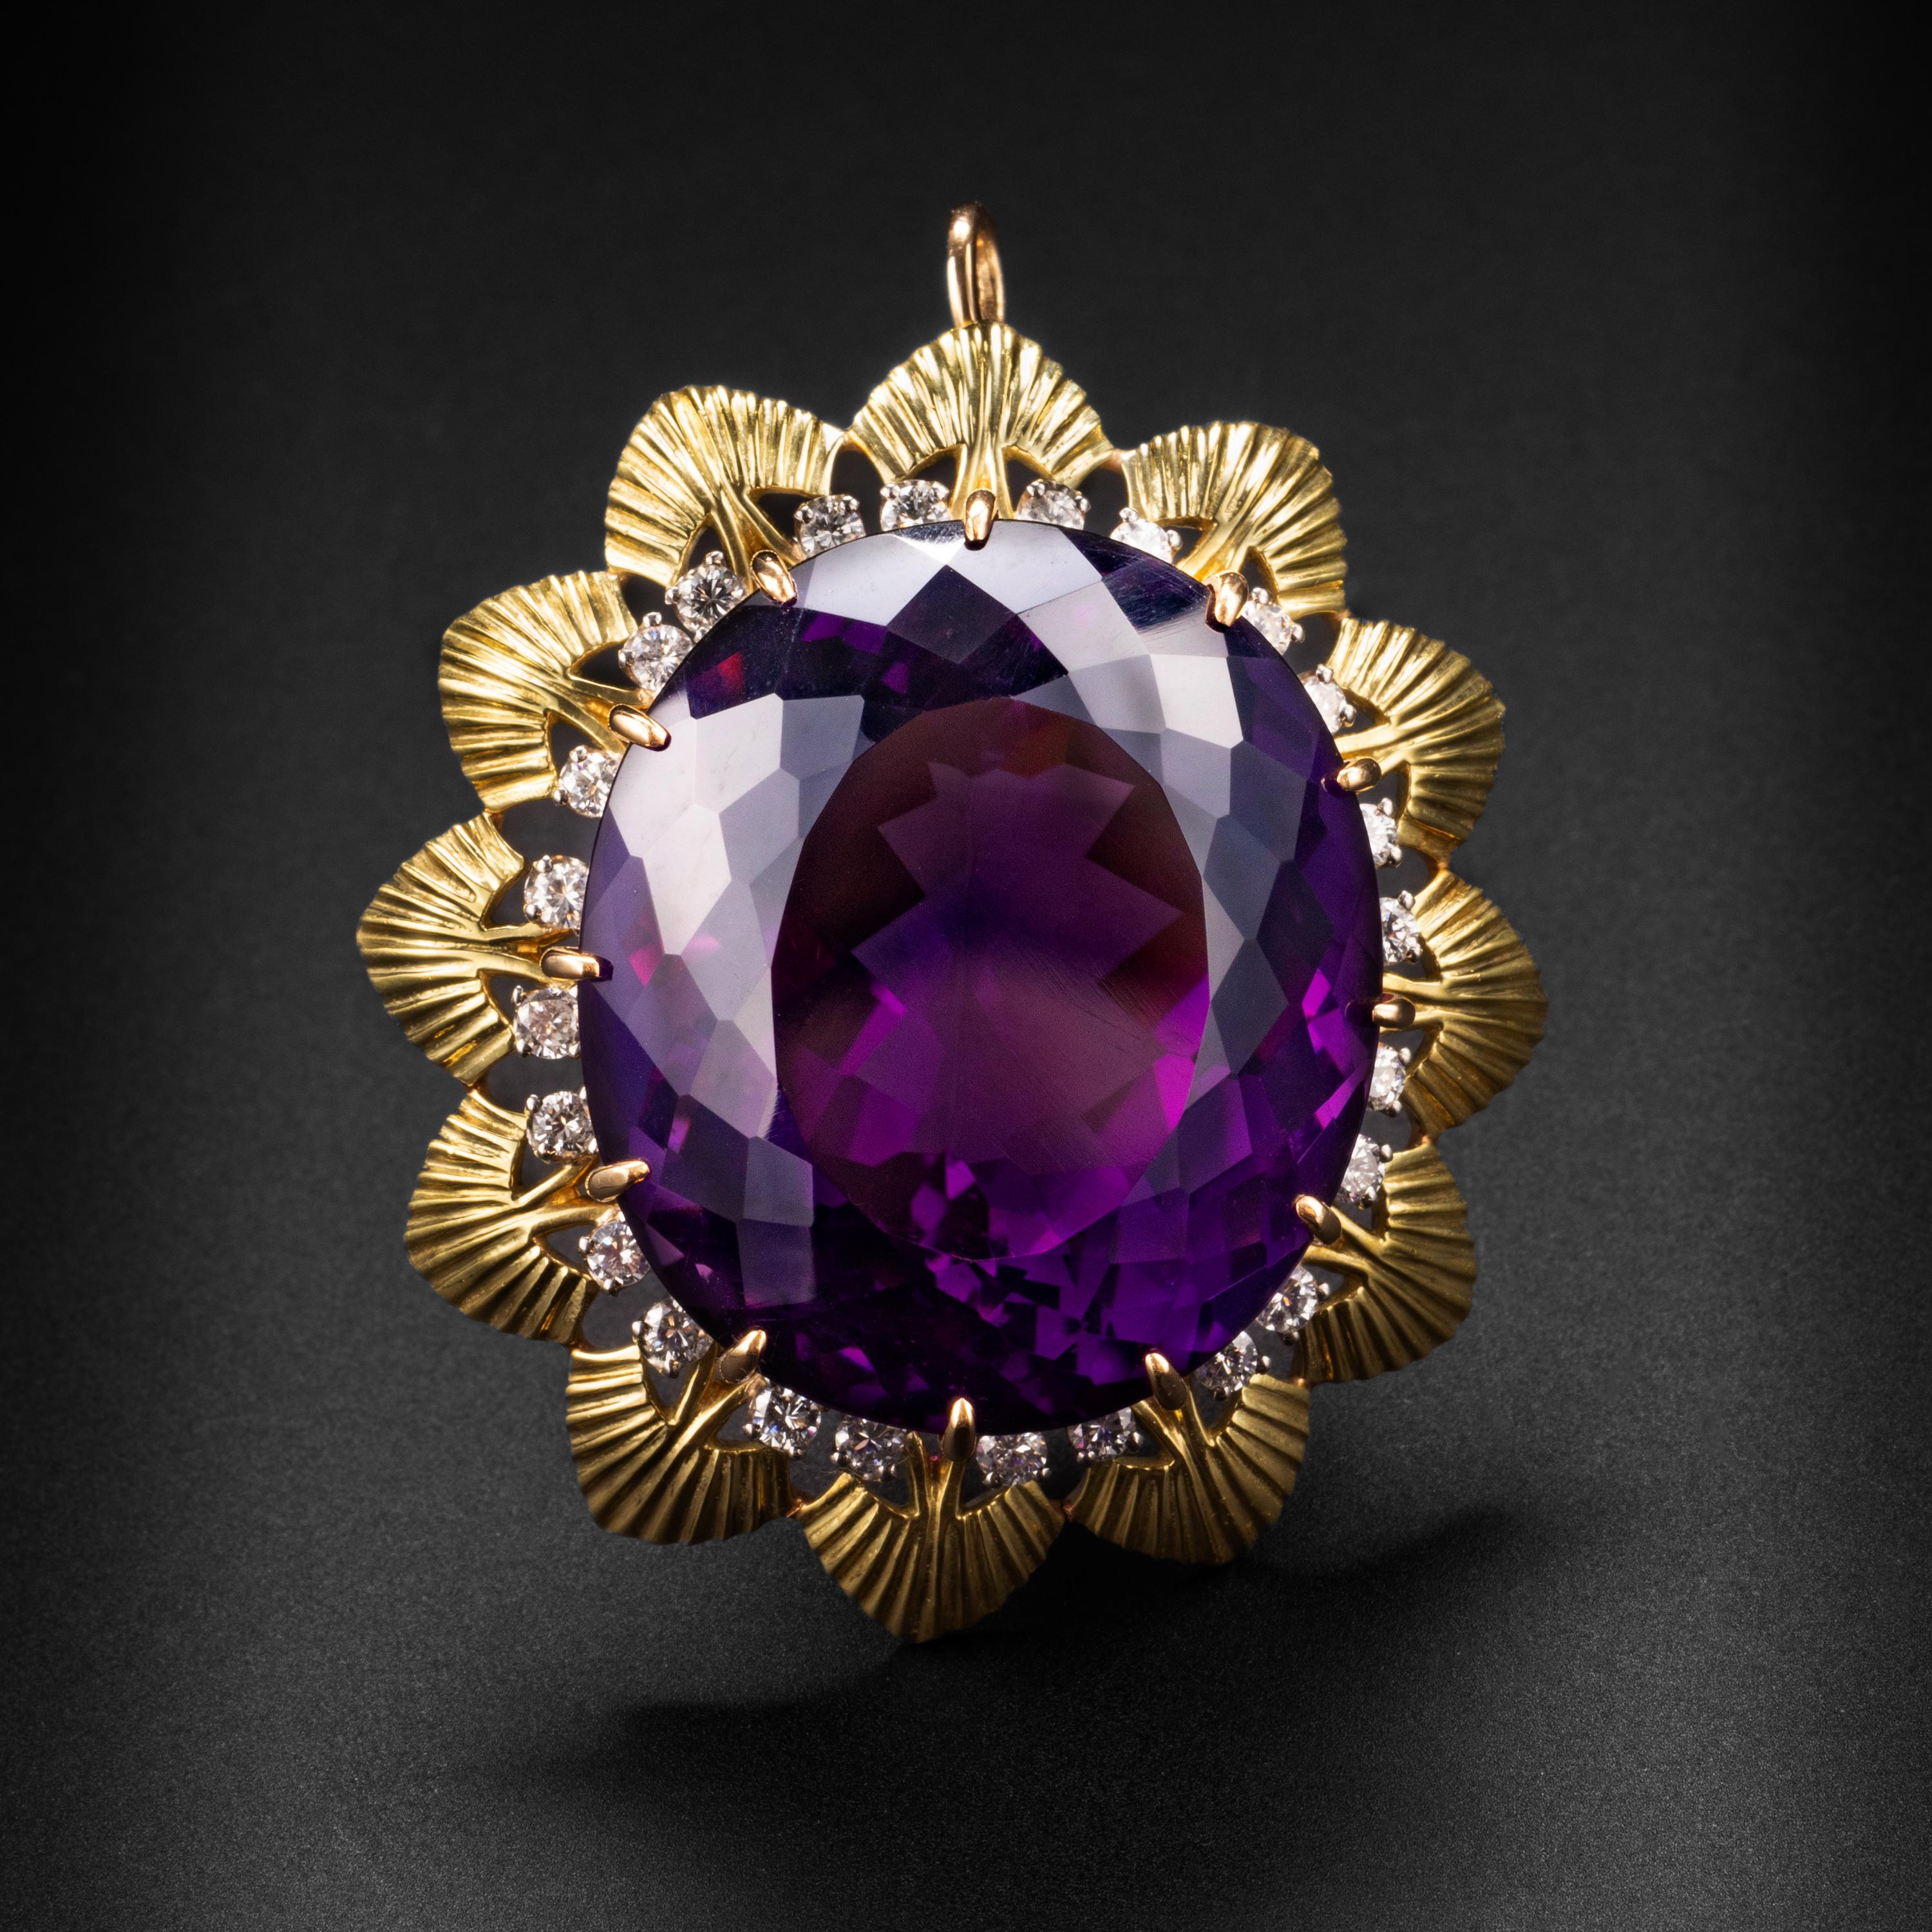 This singularly spectacular pendant -which can also be worn as a brooch- features an absolutely massive 27 x 24mm natural rich purple amethyst weighing over 55 carats. The prong-set gem is embellished with 27 bright and sparkling full-cut diamonds